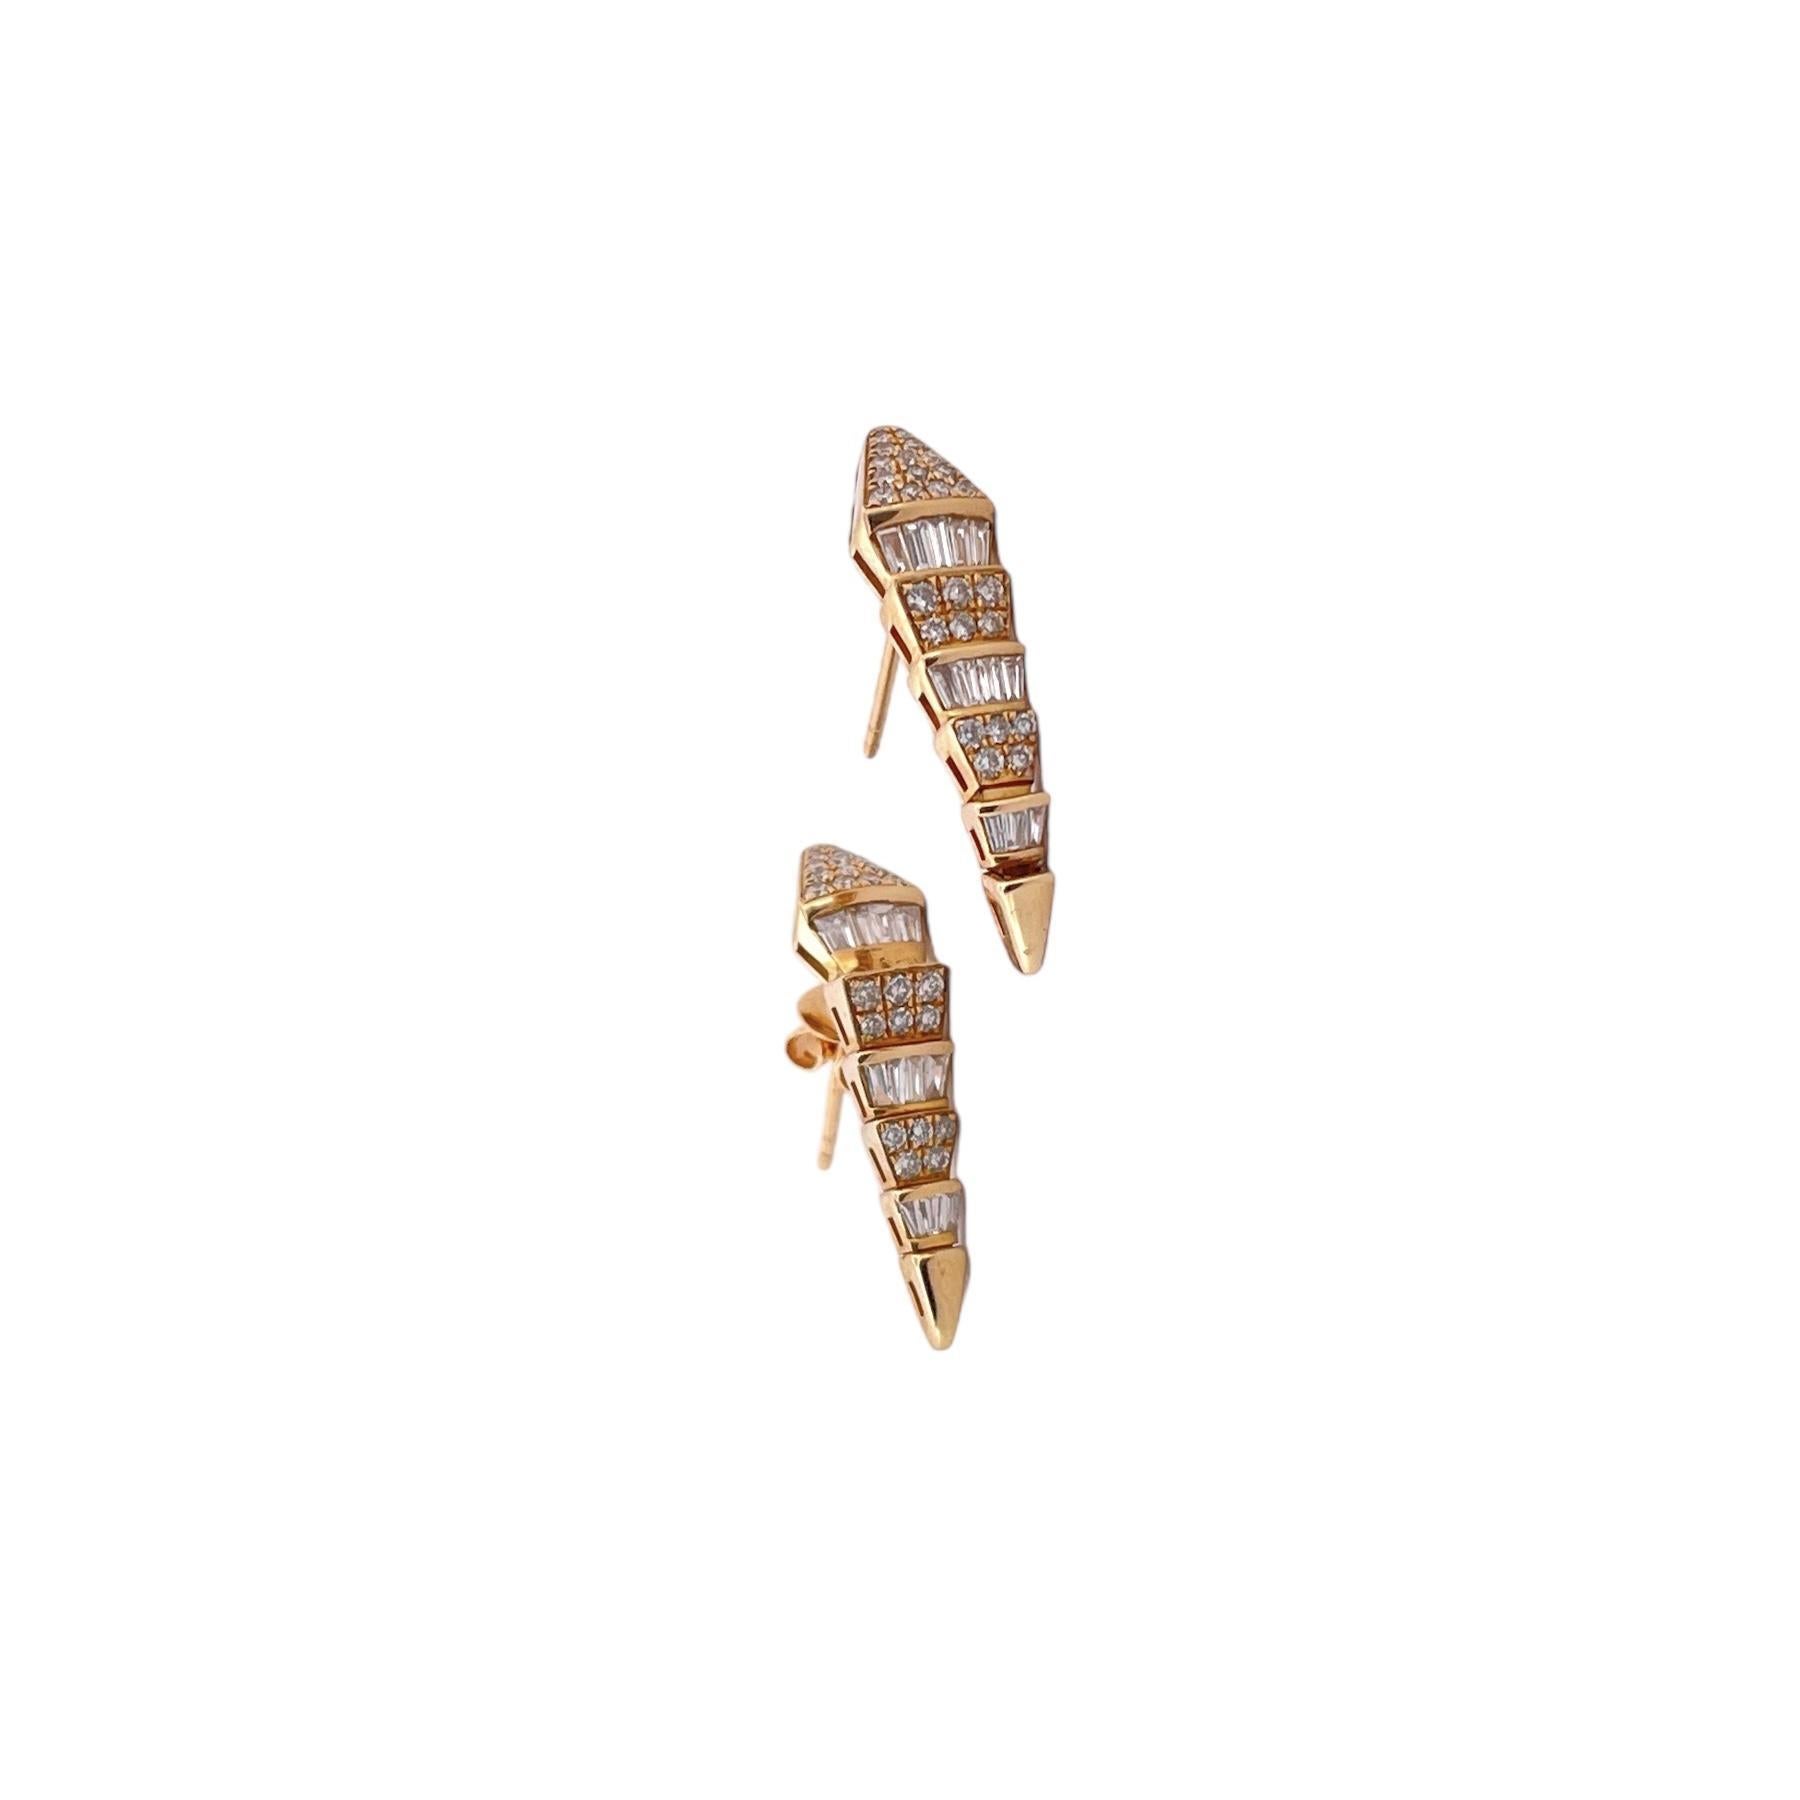 Unleash your inner enchantress with our Elegant Snake Diamond Earrings, a captivating blend of sophistication and allure. These exquisite earrings feature a sinuous snake design adorned with a total of 50 round diamonds in the body and 23 tapered